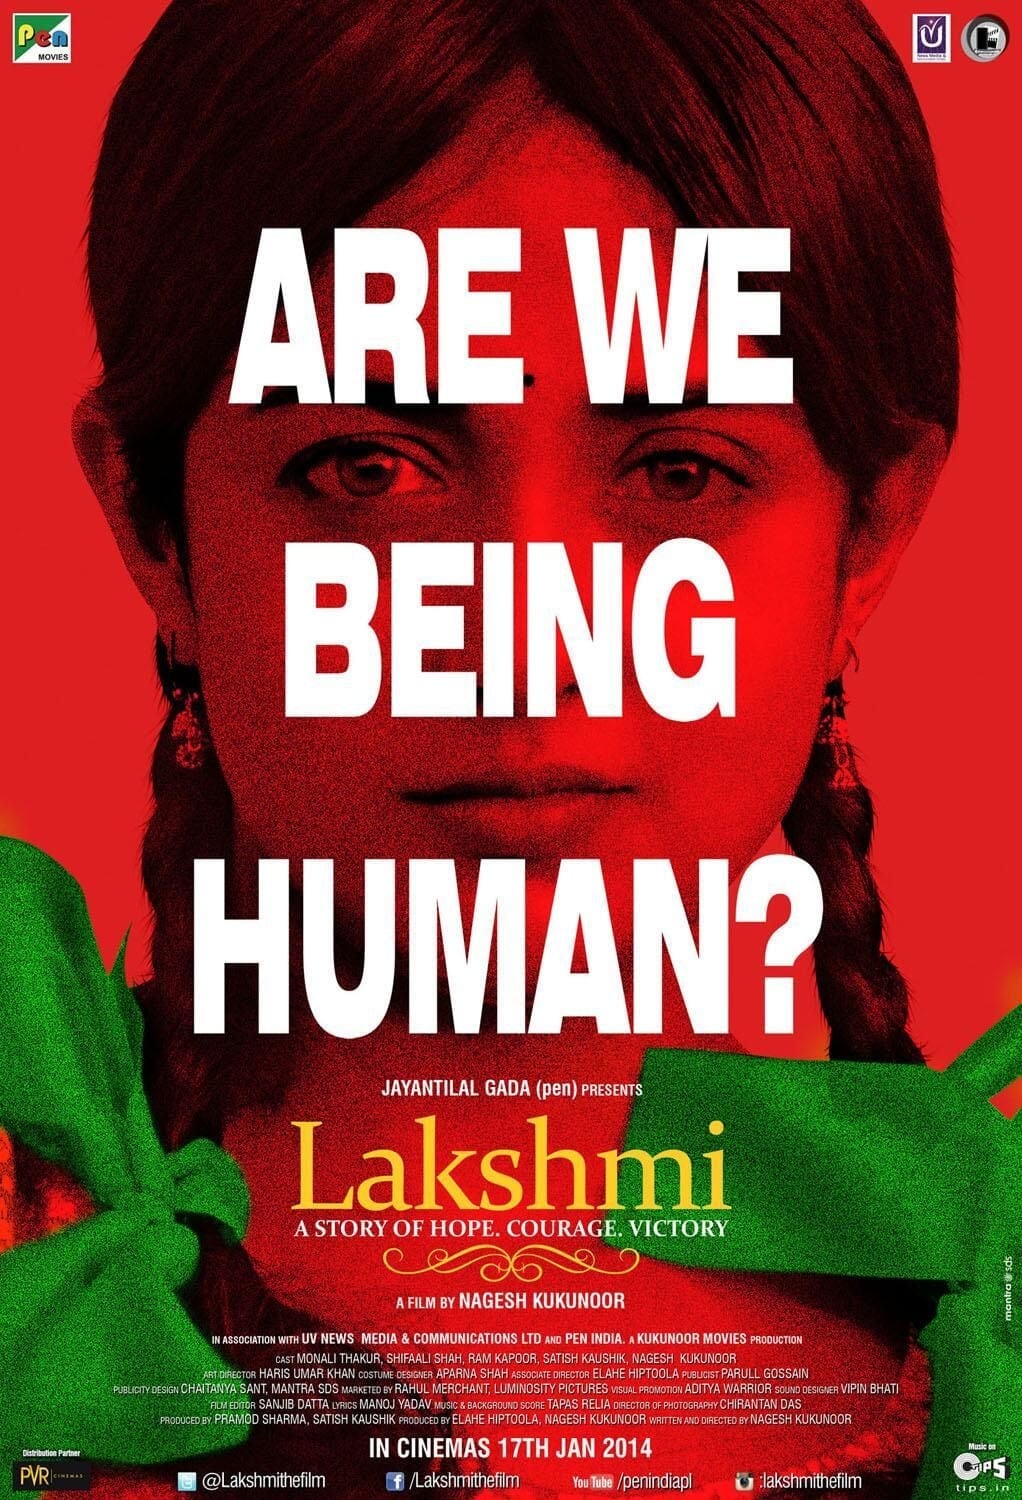 Poster for the movie "Lakshmi"